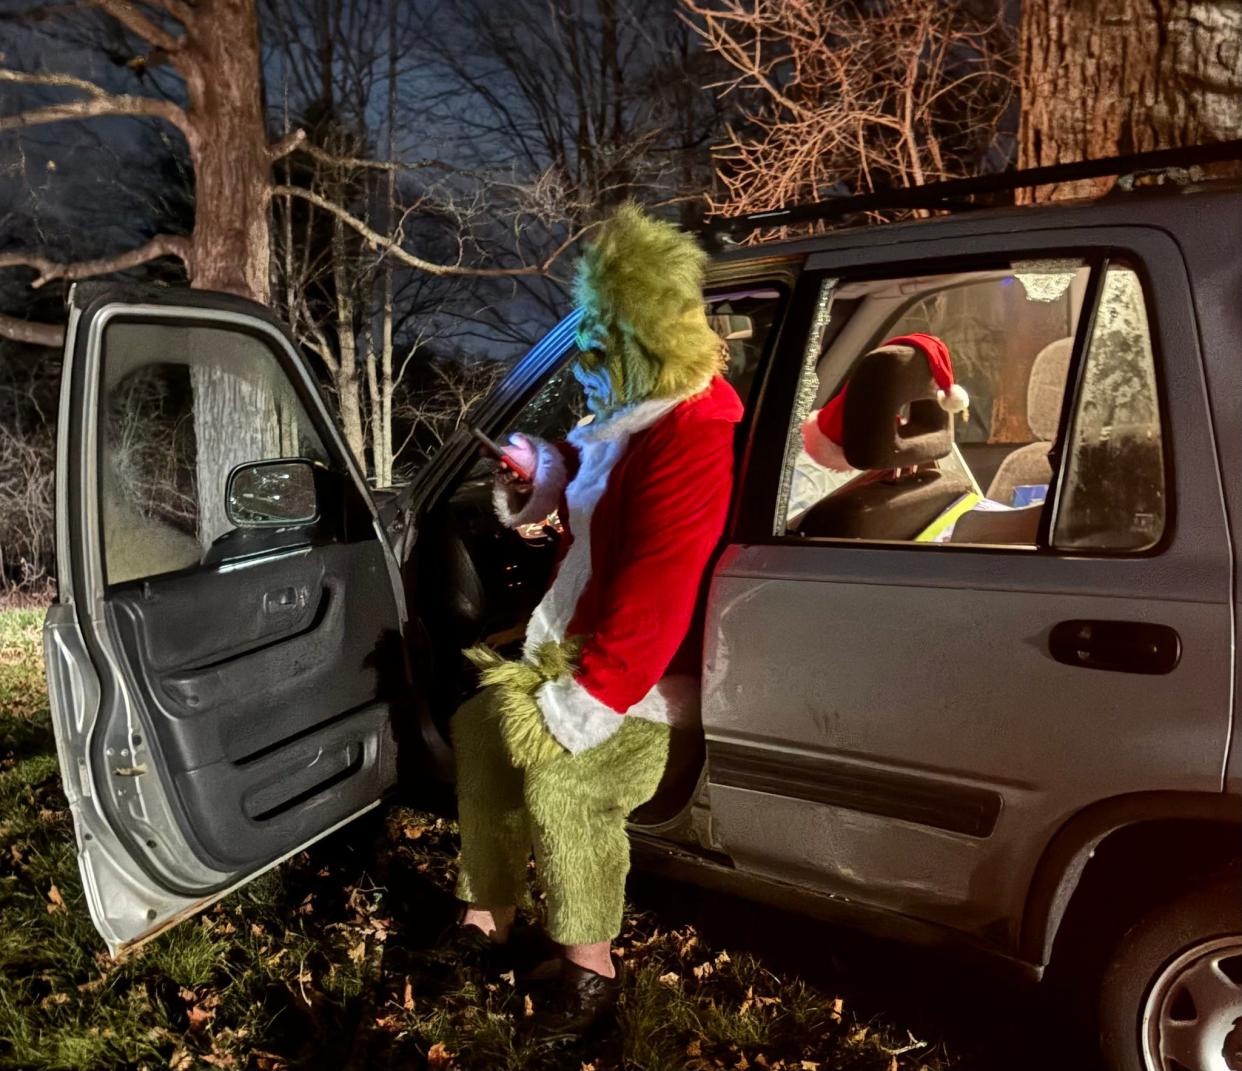 A man dressed as the Grinch was distracted and accidently drove his car through an Exeter, New Hampshire business' mailbox and road sign on Christmas night.